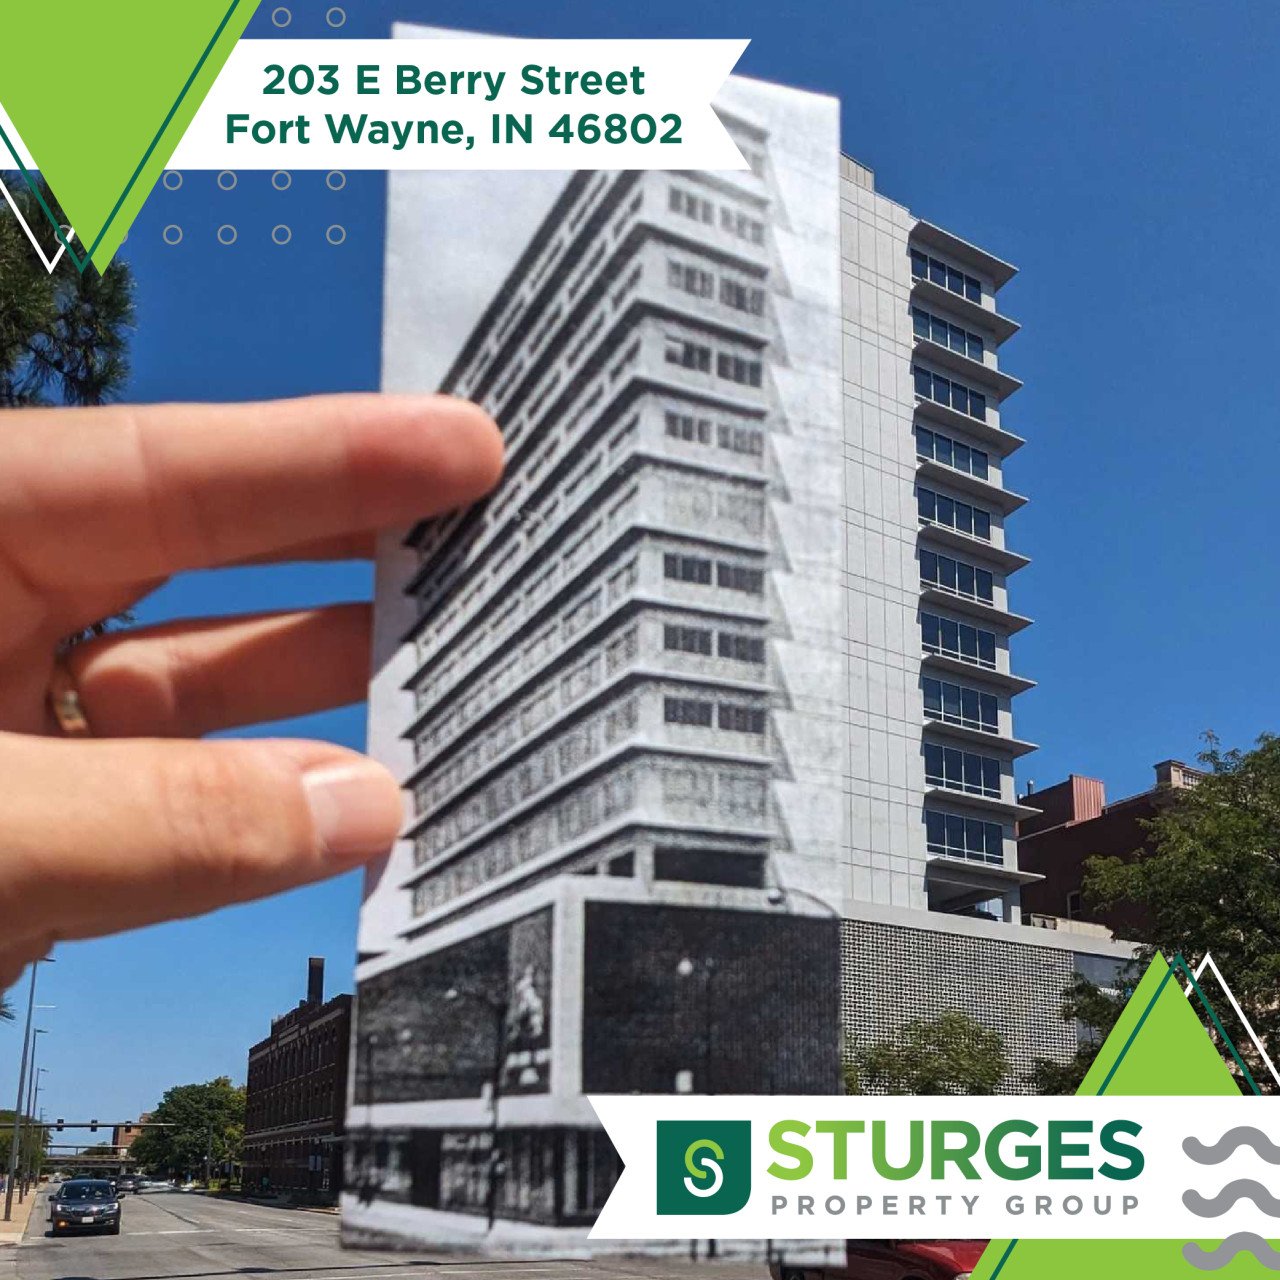 Sturges Property Group - Anthony Wayne Building, 203 E Berry St, Fort Wayne, IN 46802